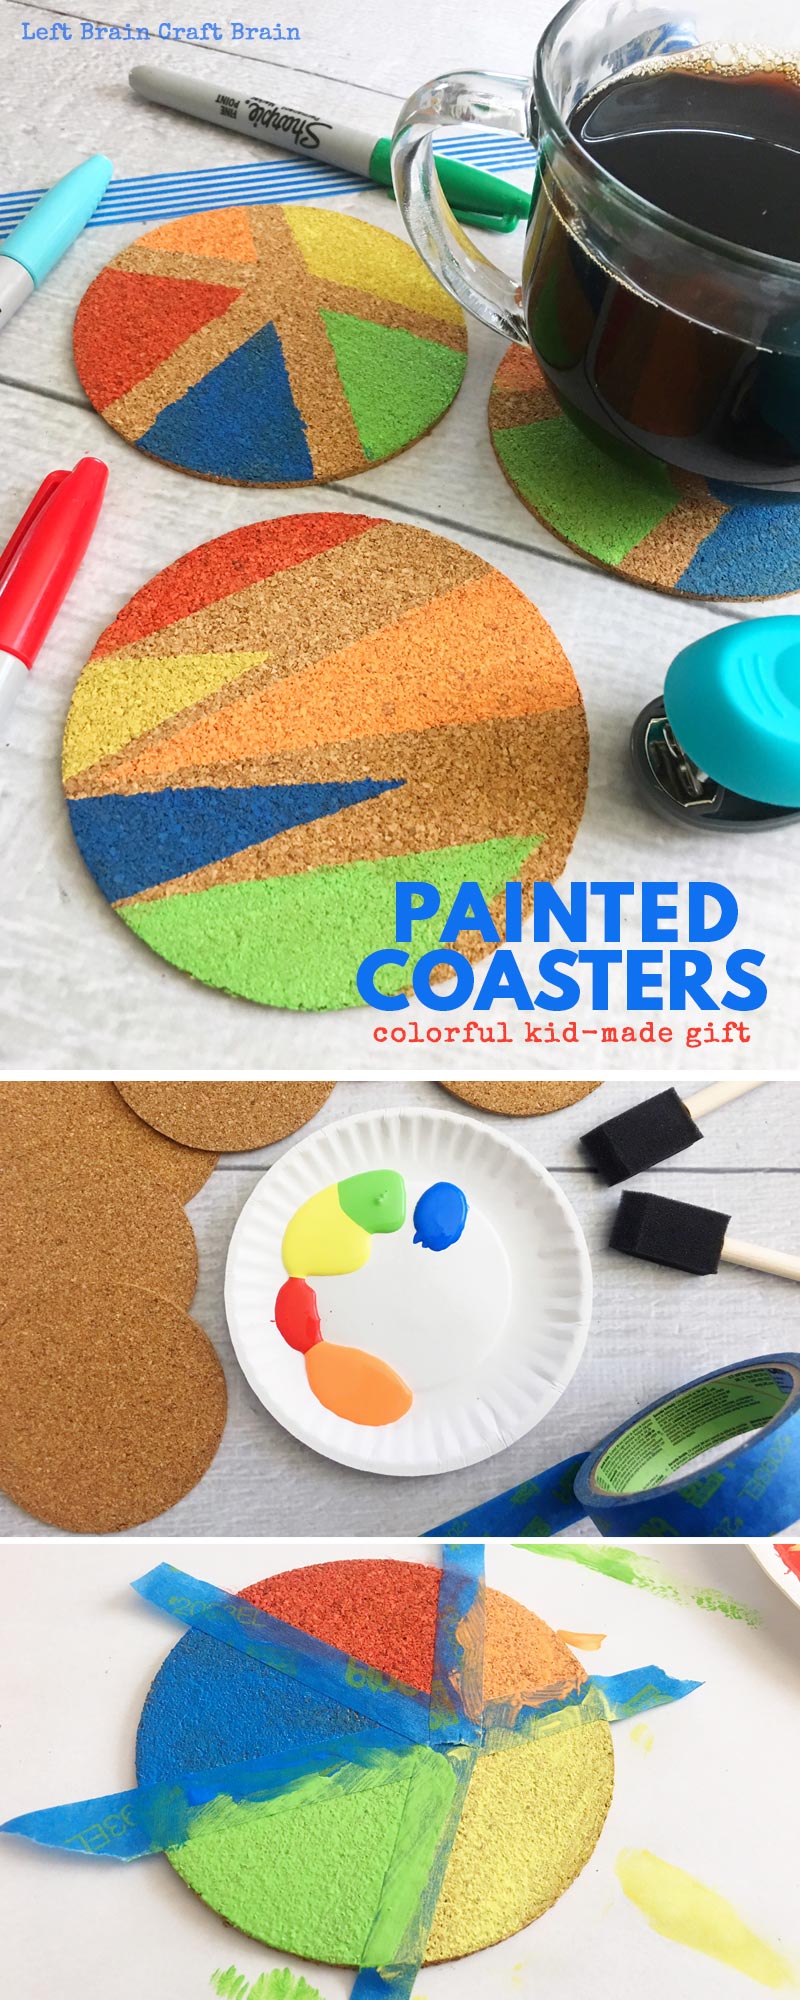 Create these beautiful DIY painted coasters for your Mother's Day gift or Father's Day gift! It's a math art activity for your creative kids that like creating homemade gifts. 